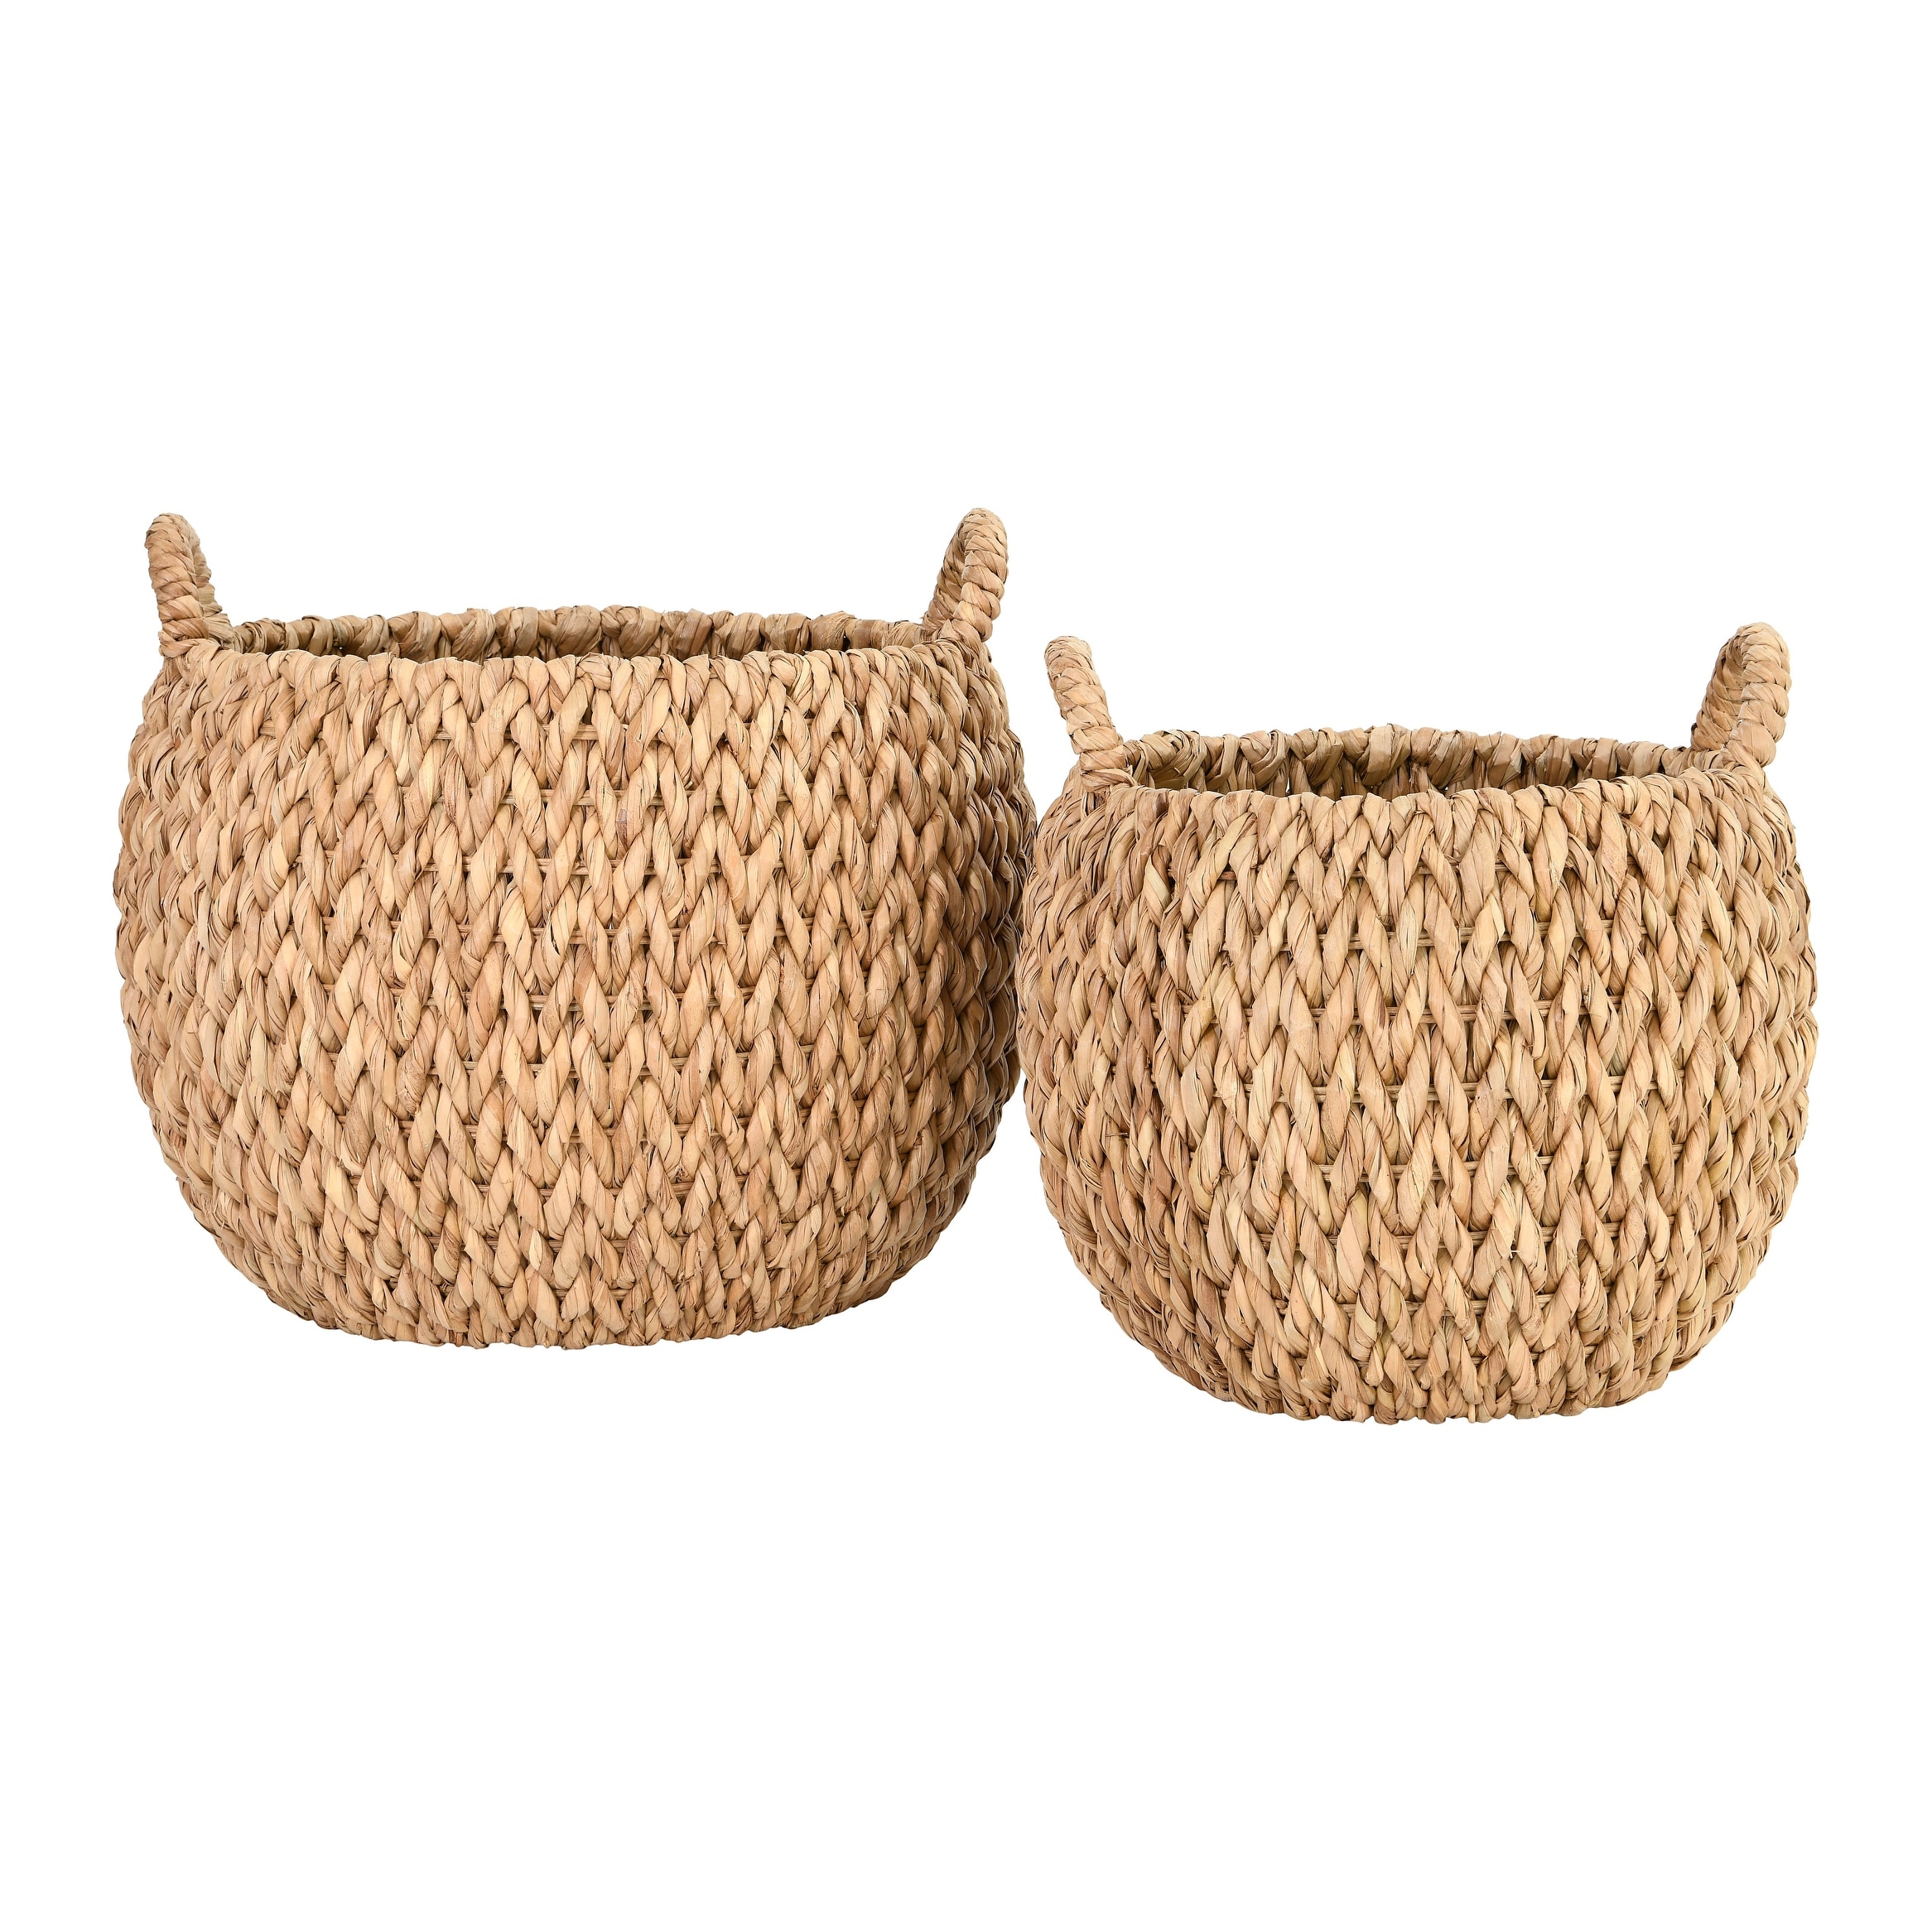 Natural Wicker Small Changing Table Basket with Handles + Reviews